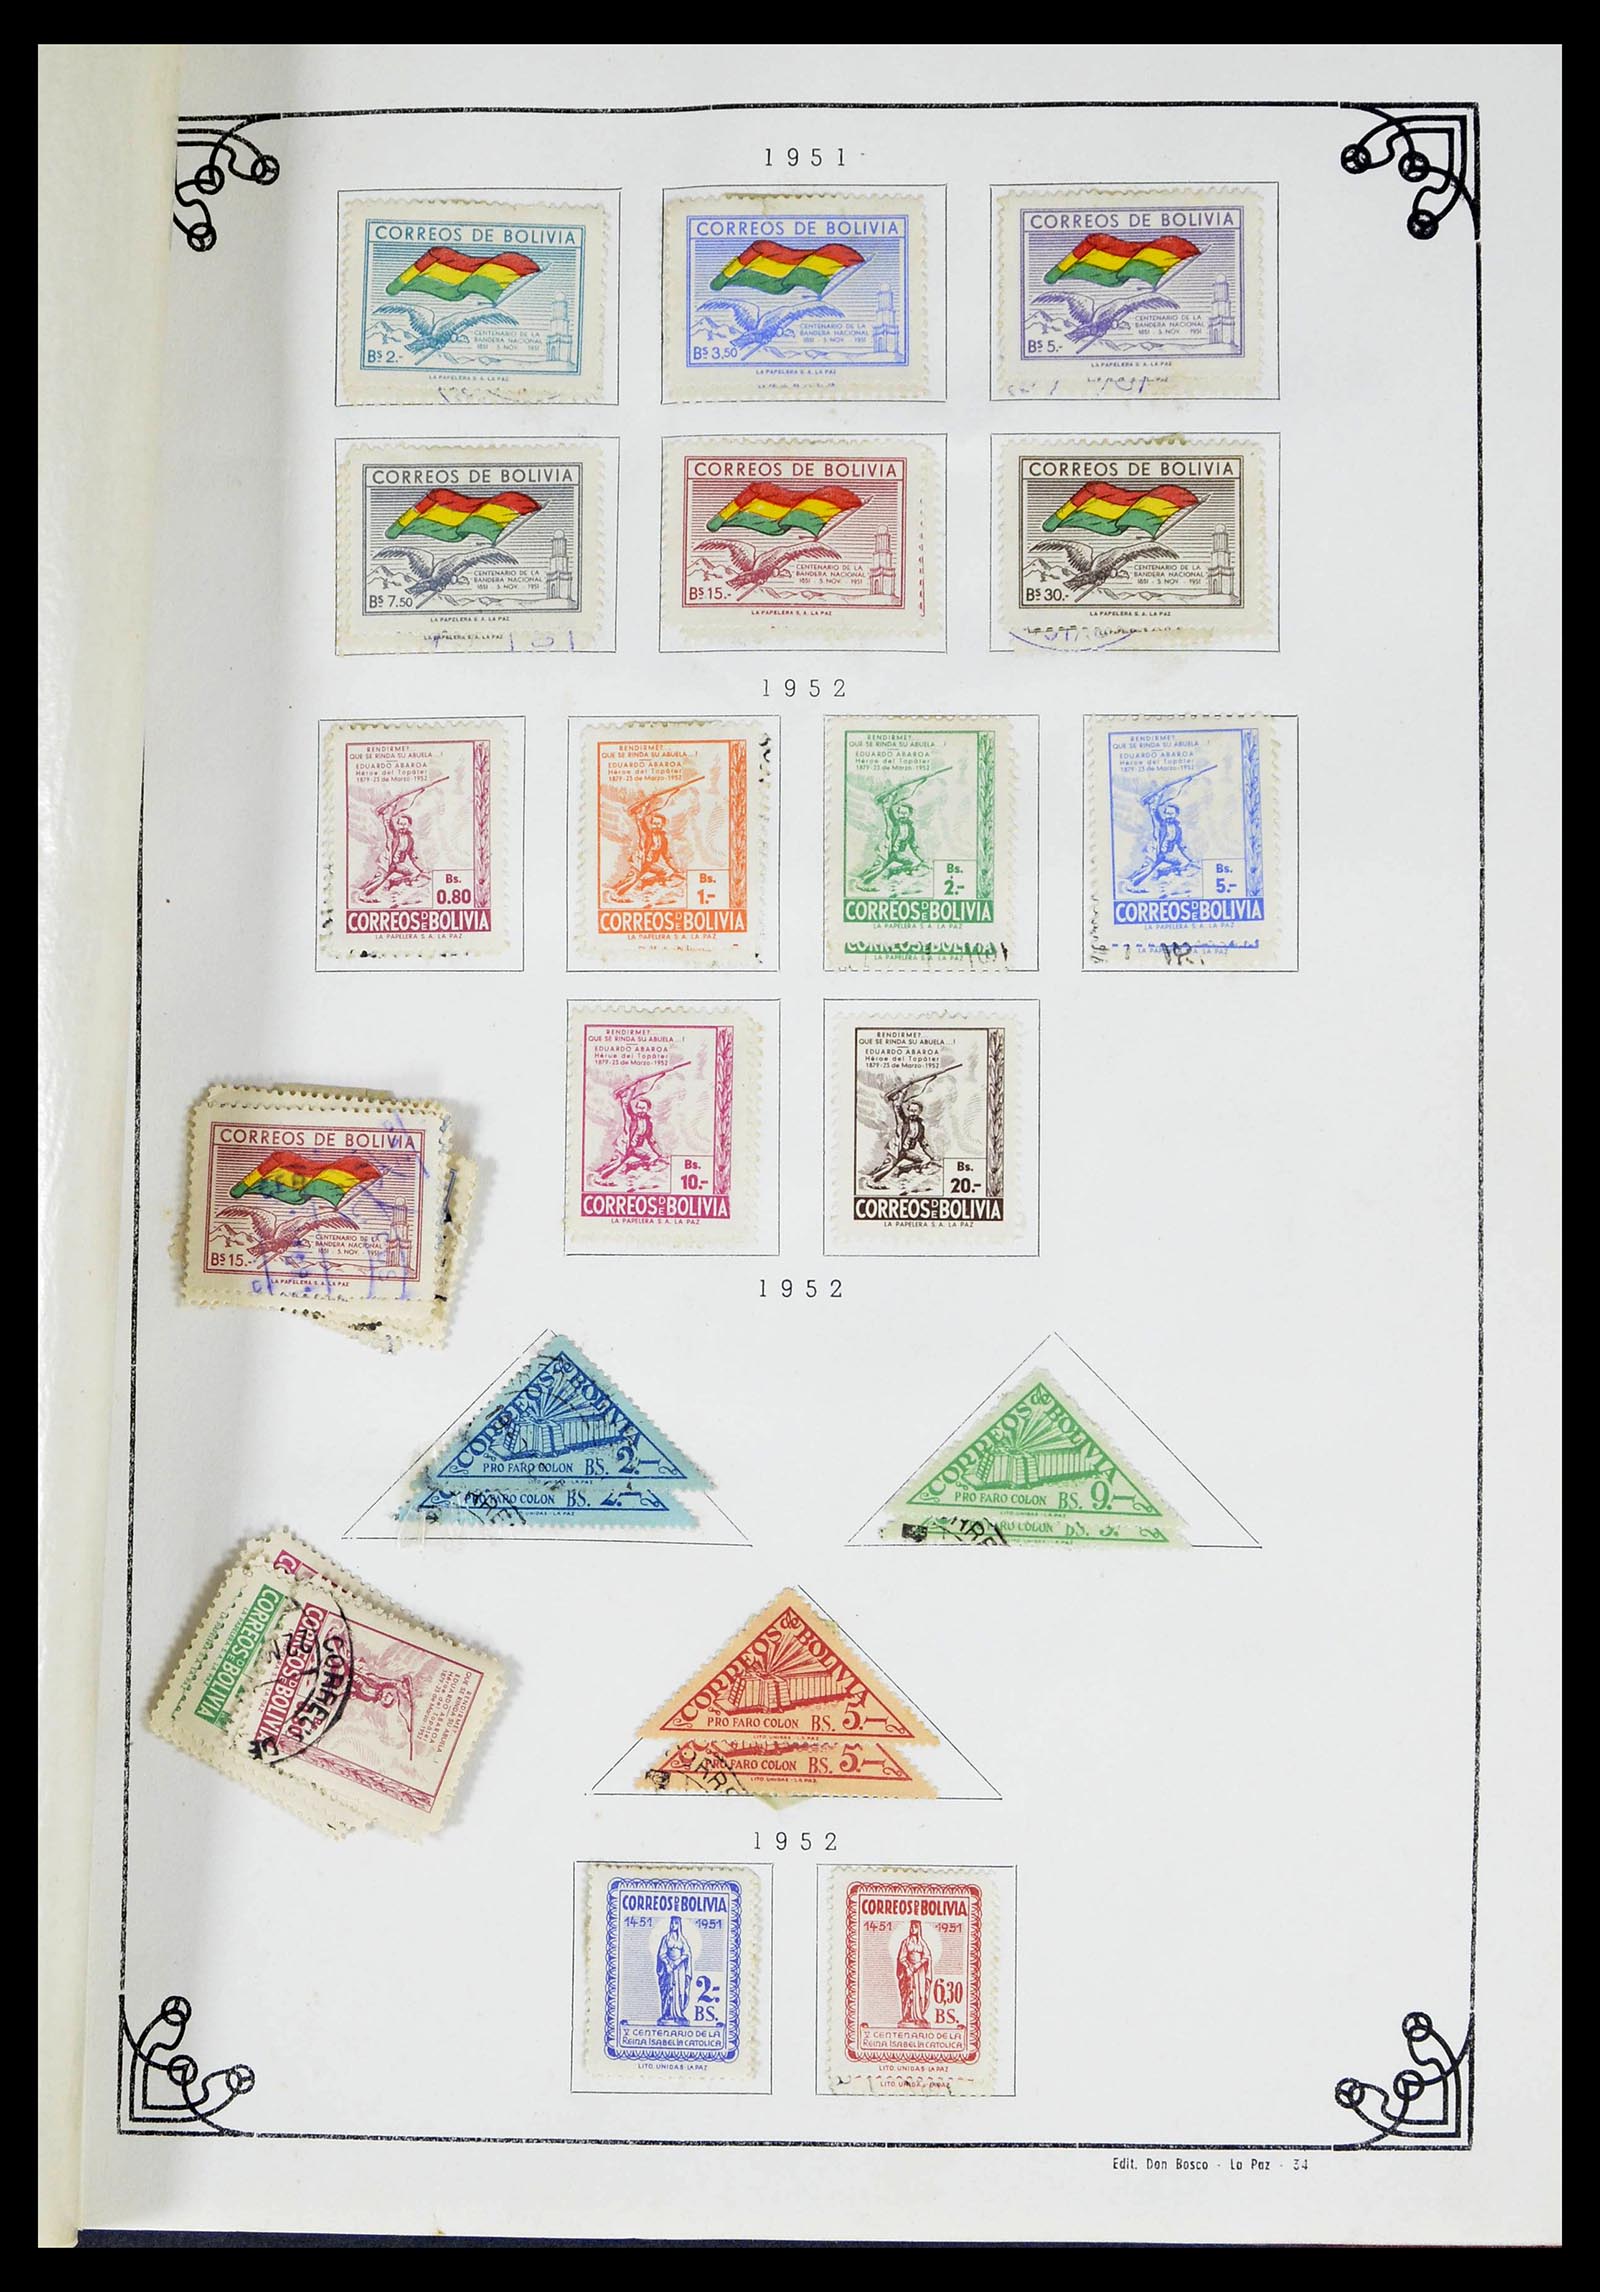 39224 0037 - Stamp collection 39224 Bolivia 1849-1955.